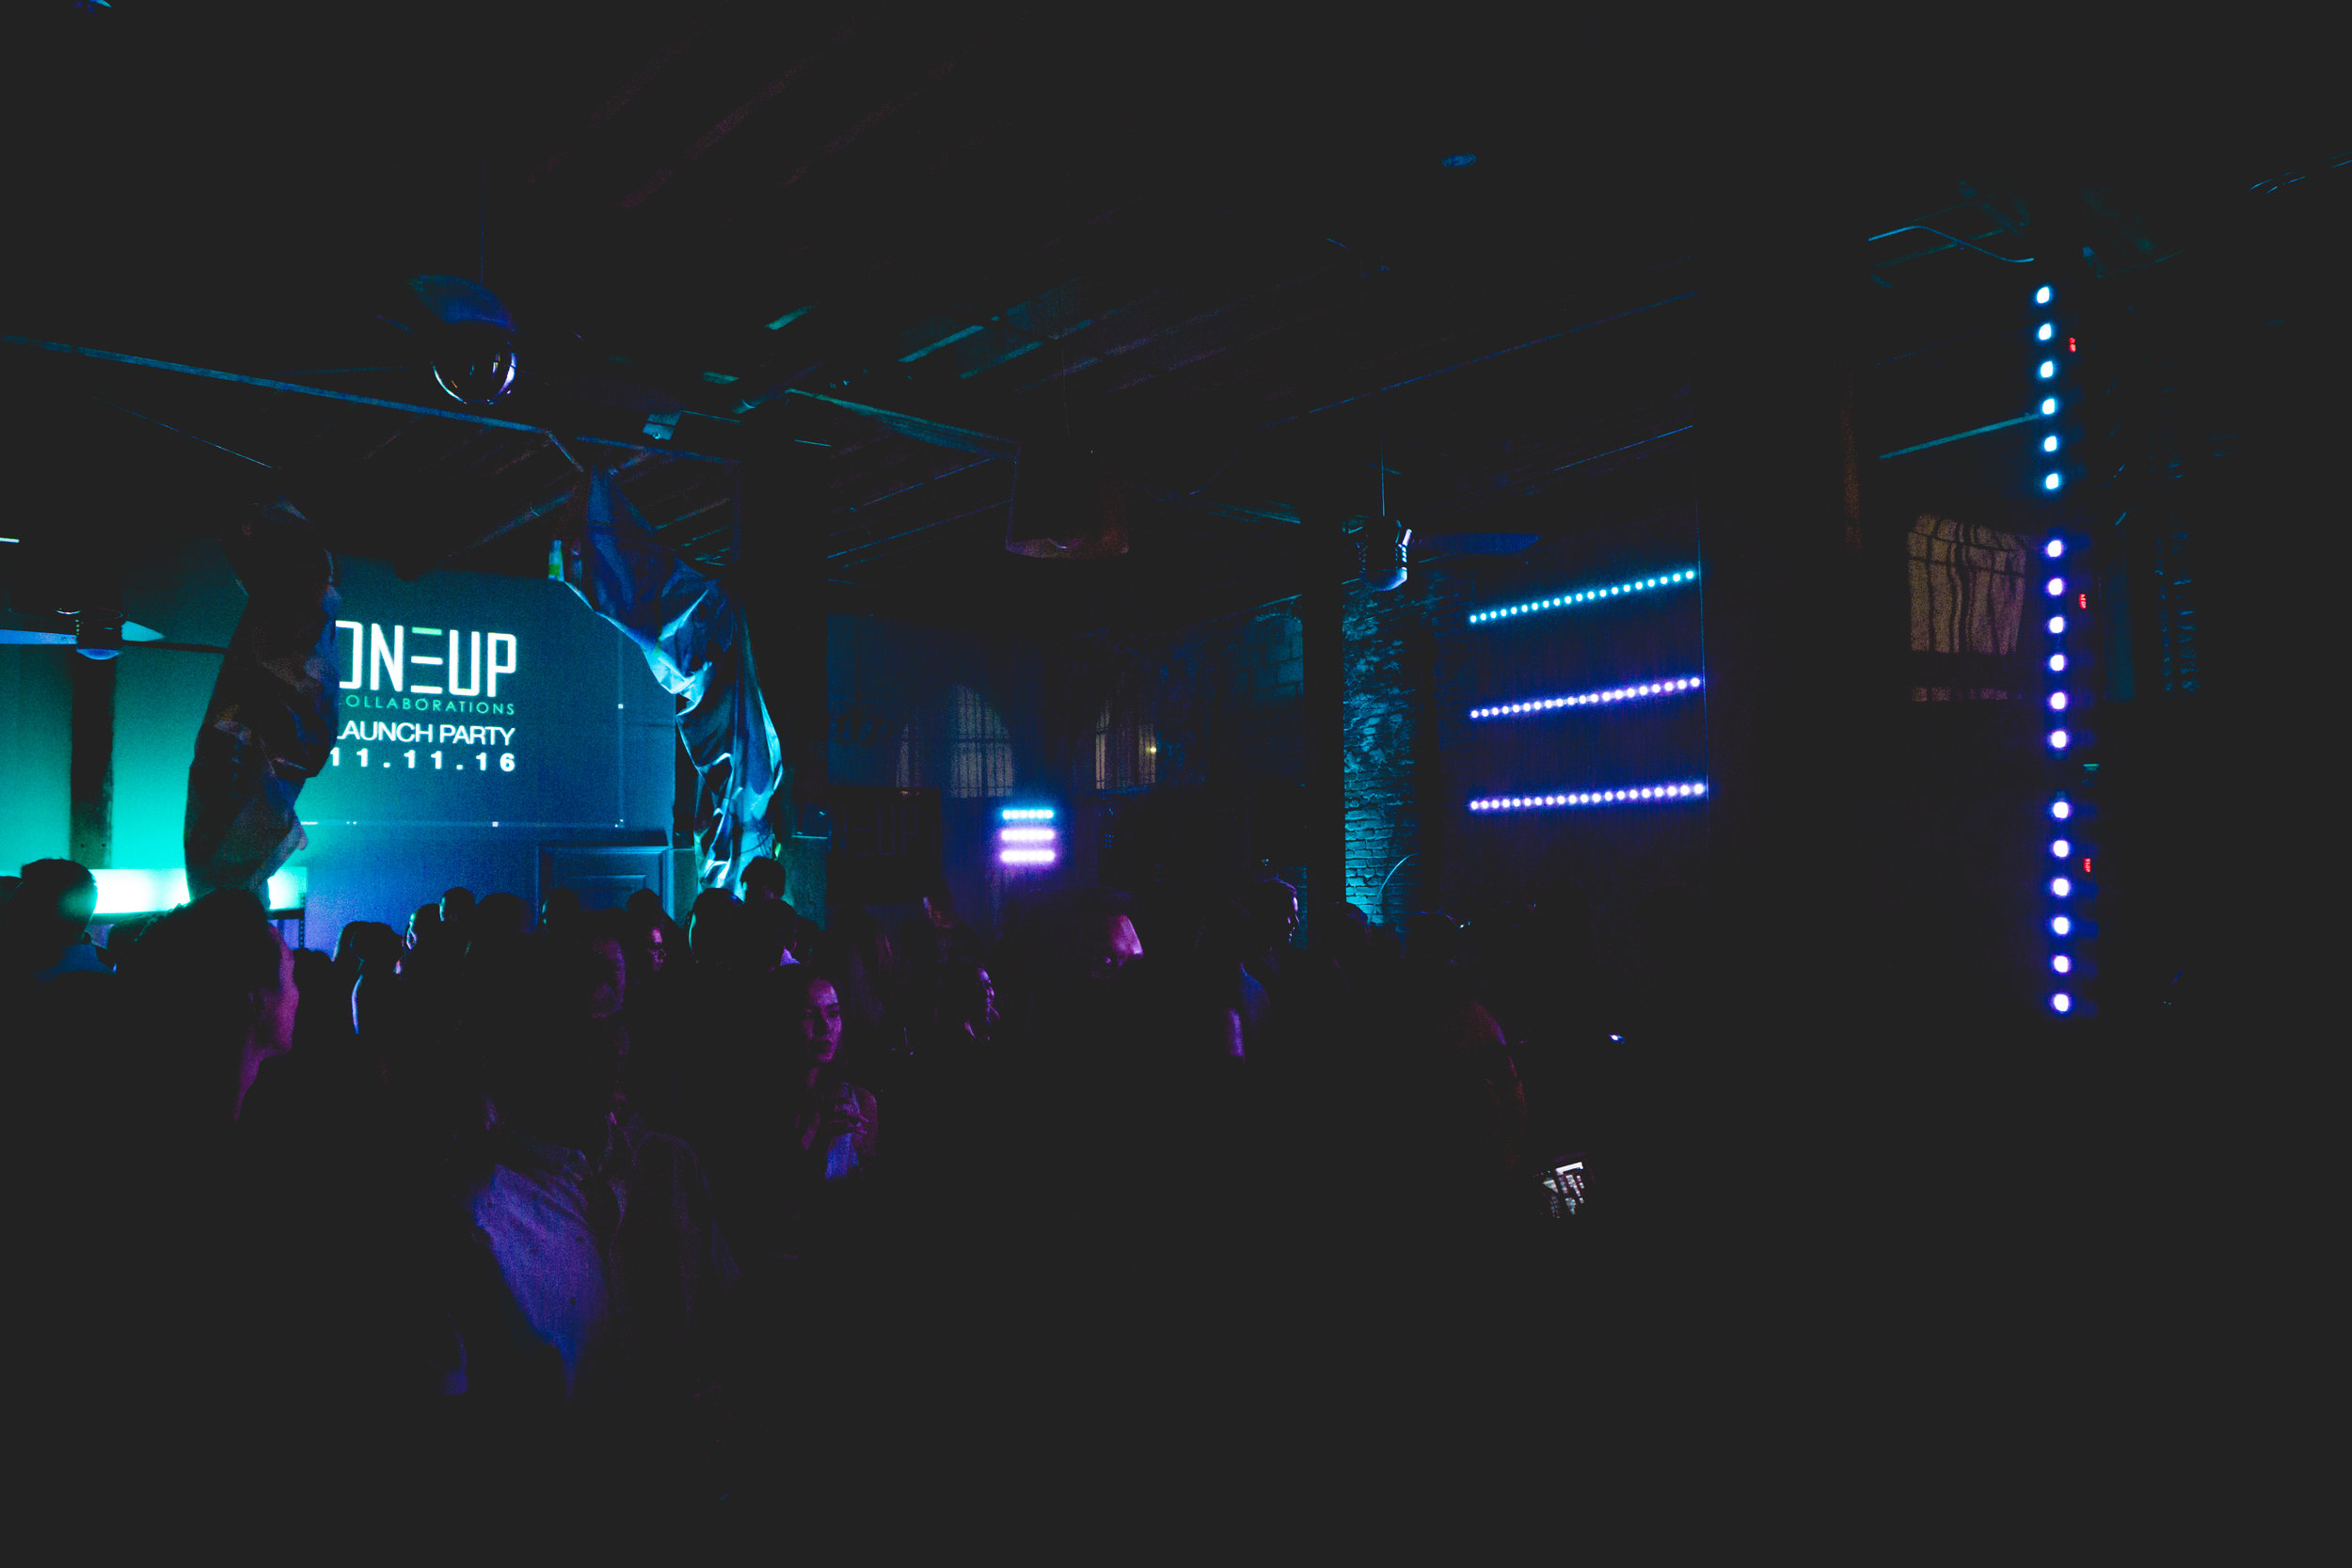 Shout out to DJZ Productions for perfect lighting that was totally on brand with the ONEUP logo.